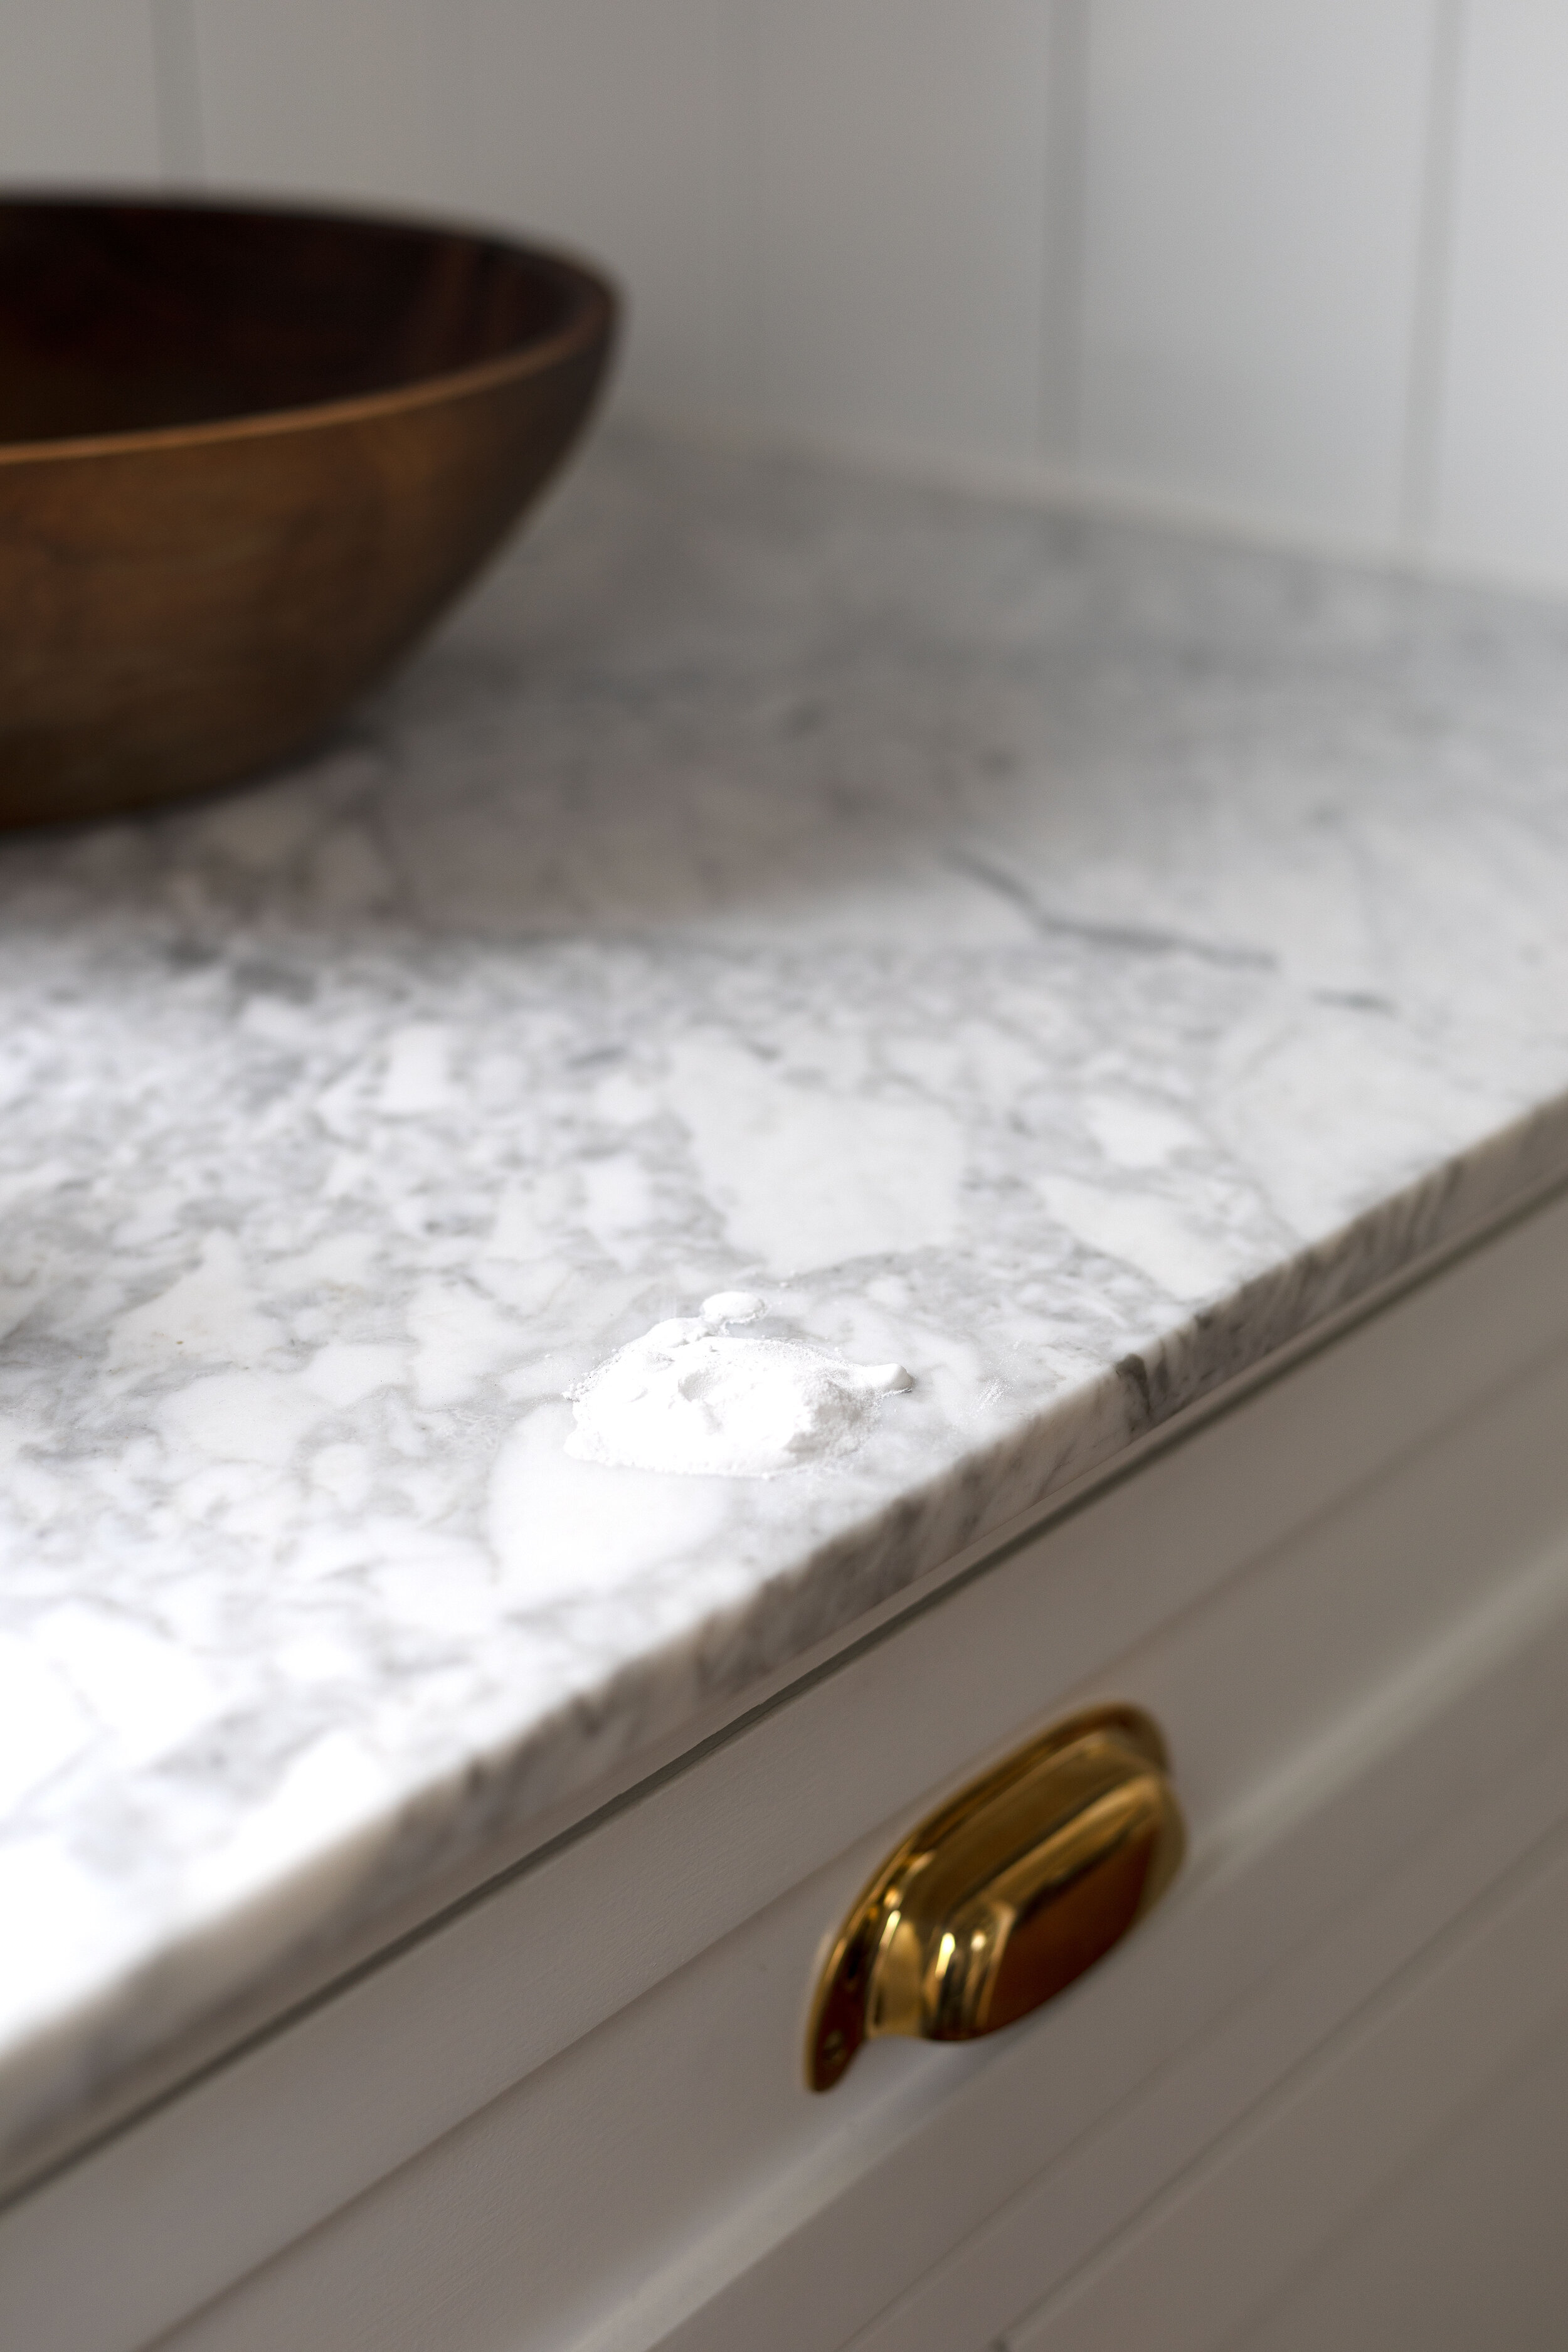 DIY // How to Remove Stains from Marble Surfaces using a Homemade